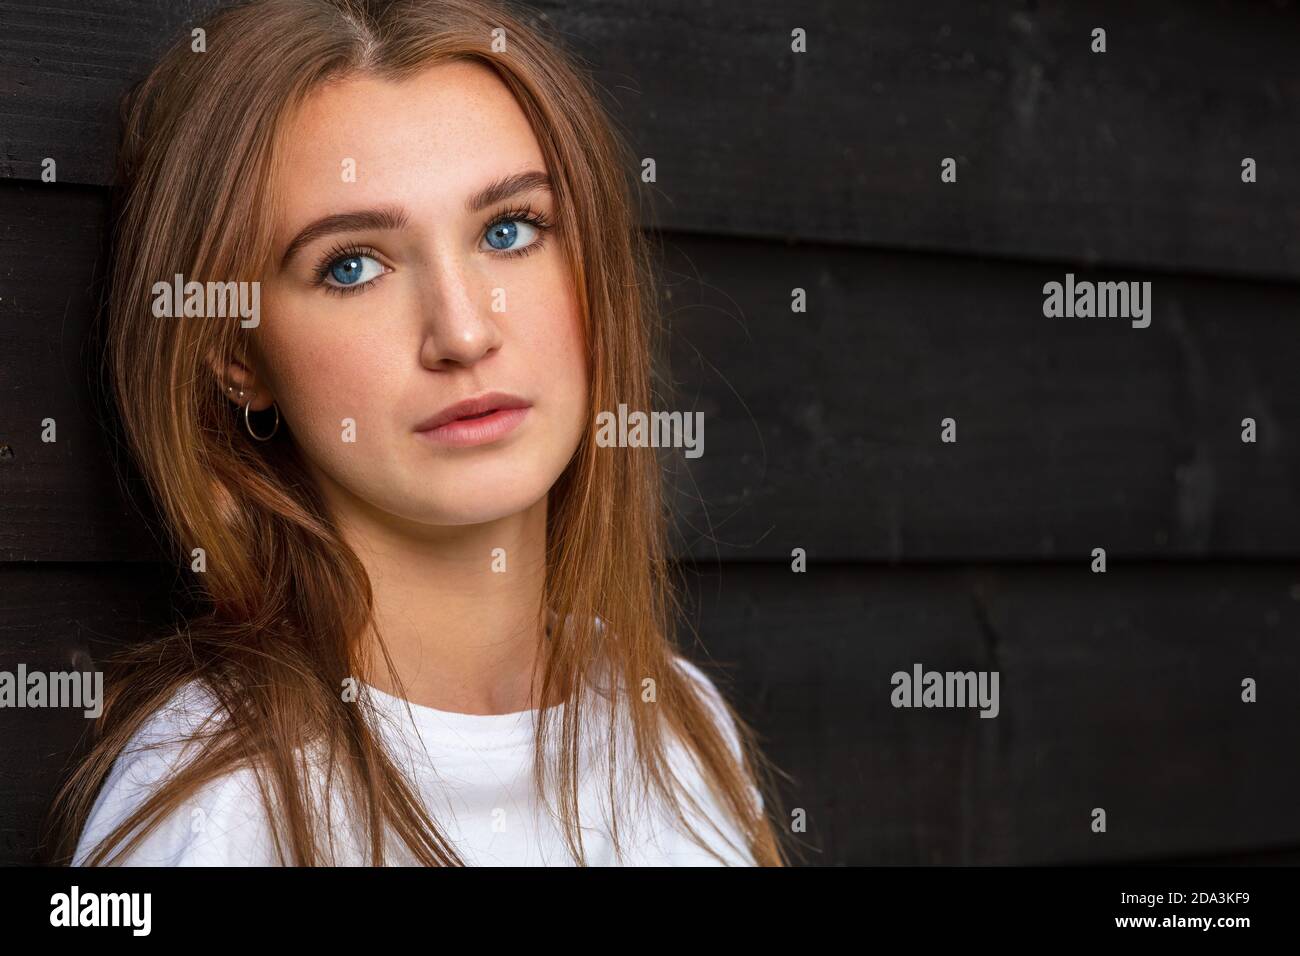 Sad depressed thoughtful girl teenager female young woman with blue eyes outside wearing a white t-shirt Stock Photo